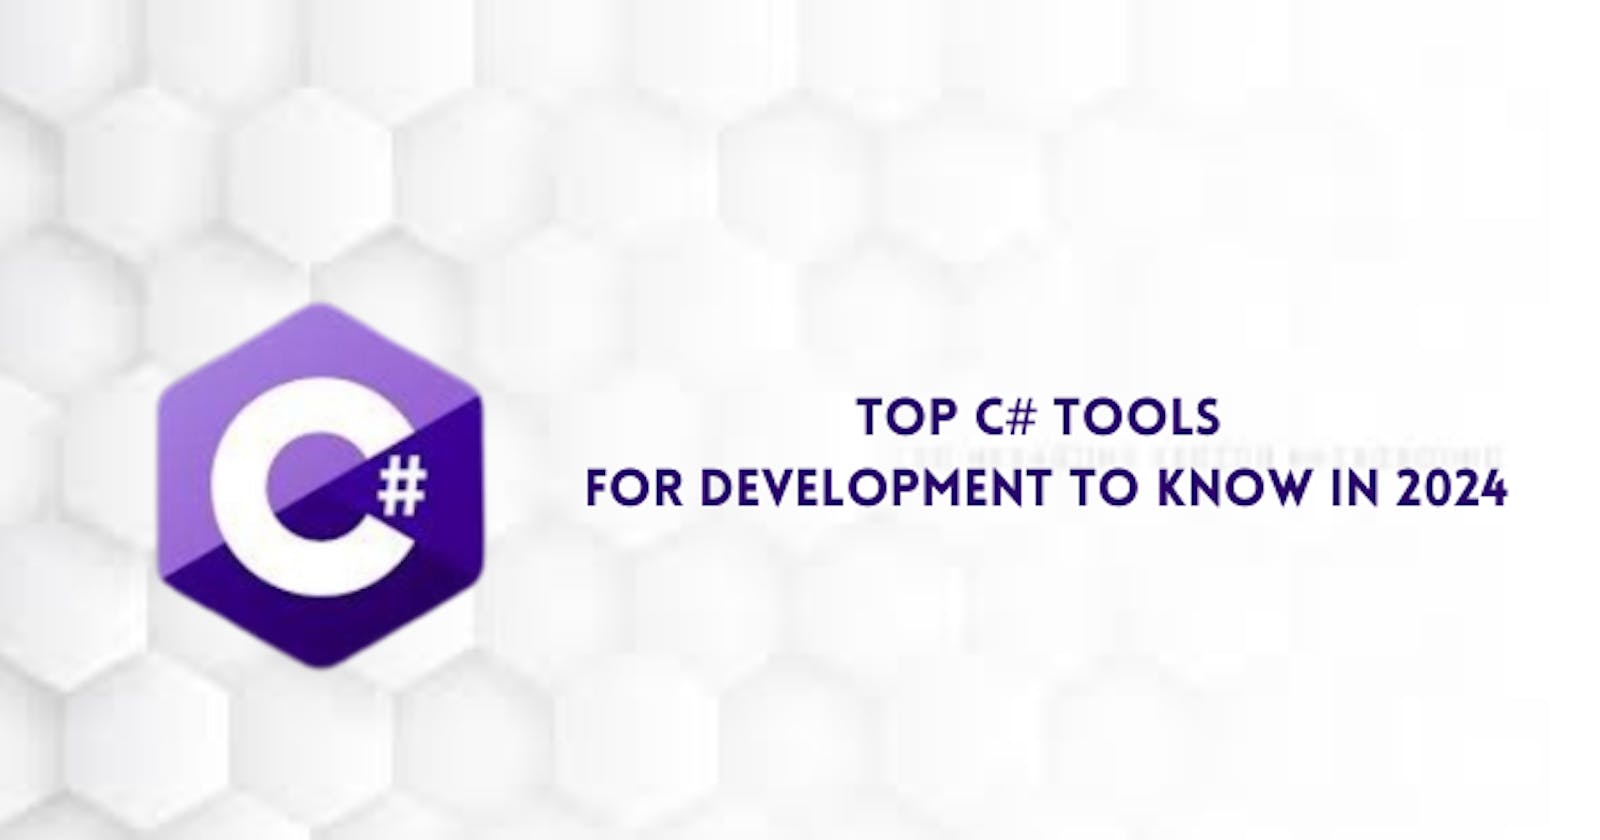 Top C# tools for development to know in 2024